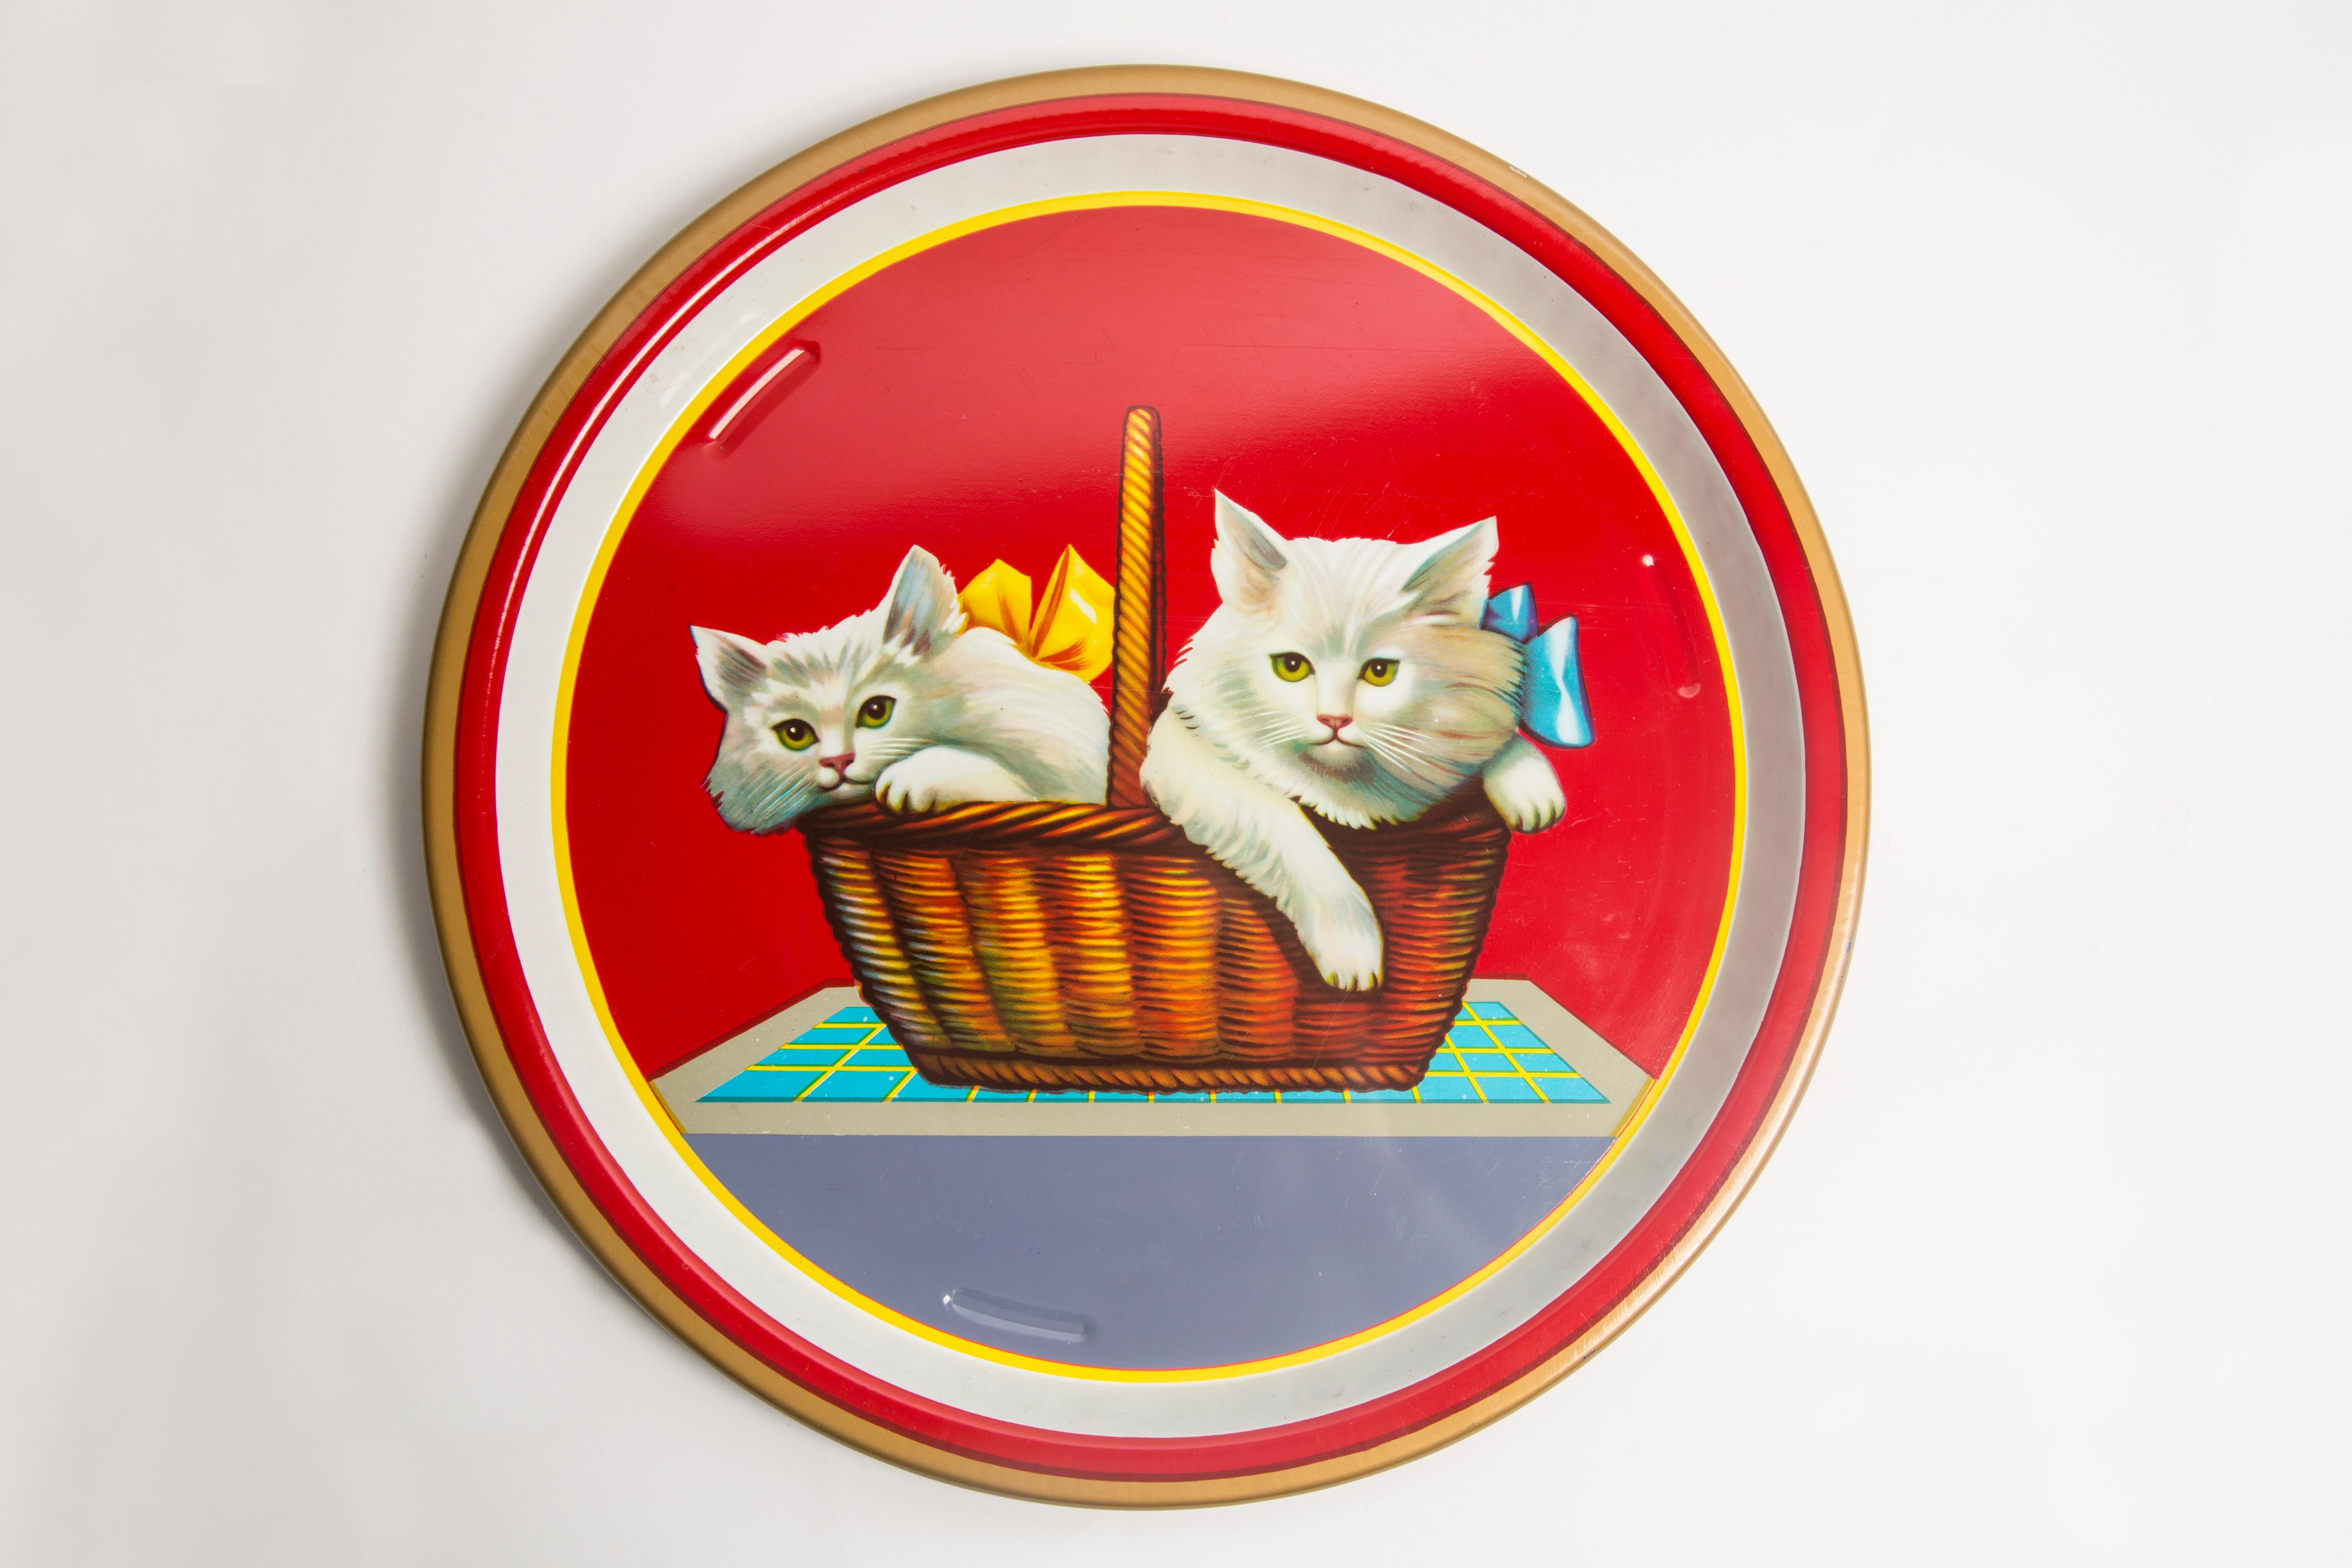 Italian Midcentury Vintage Red Cats Decorative Metal Plate, Poland, 1960s For Sale